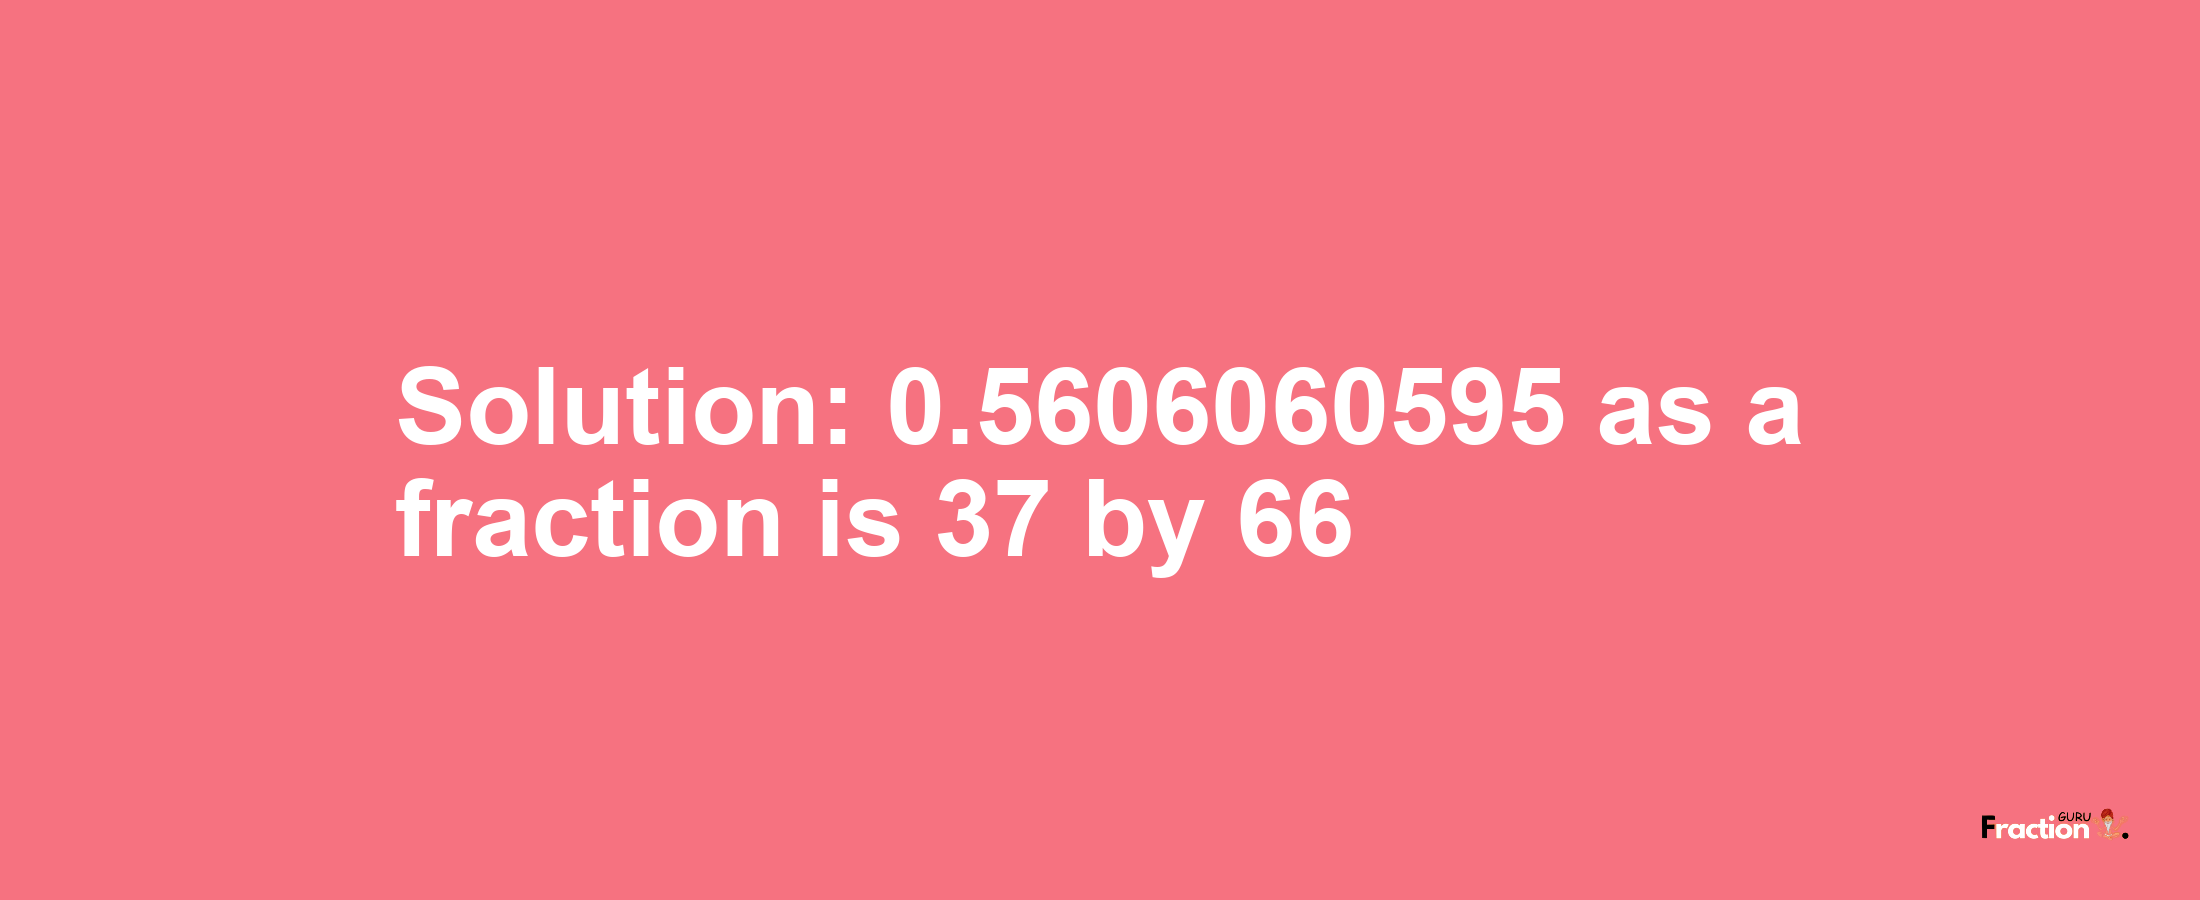 Solution:0.5606060595 as a fraction is 37/66